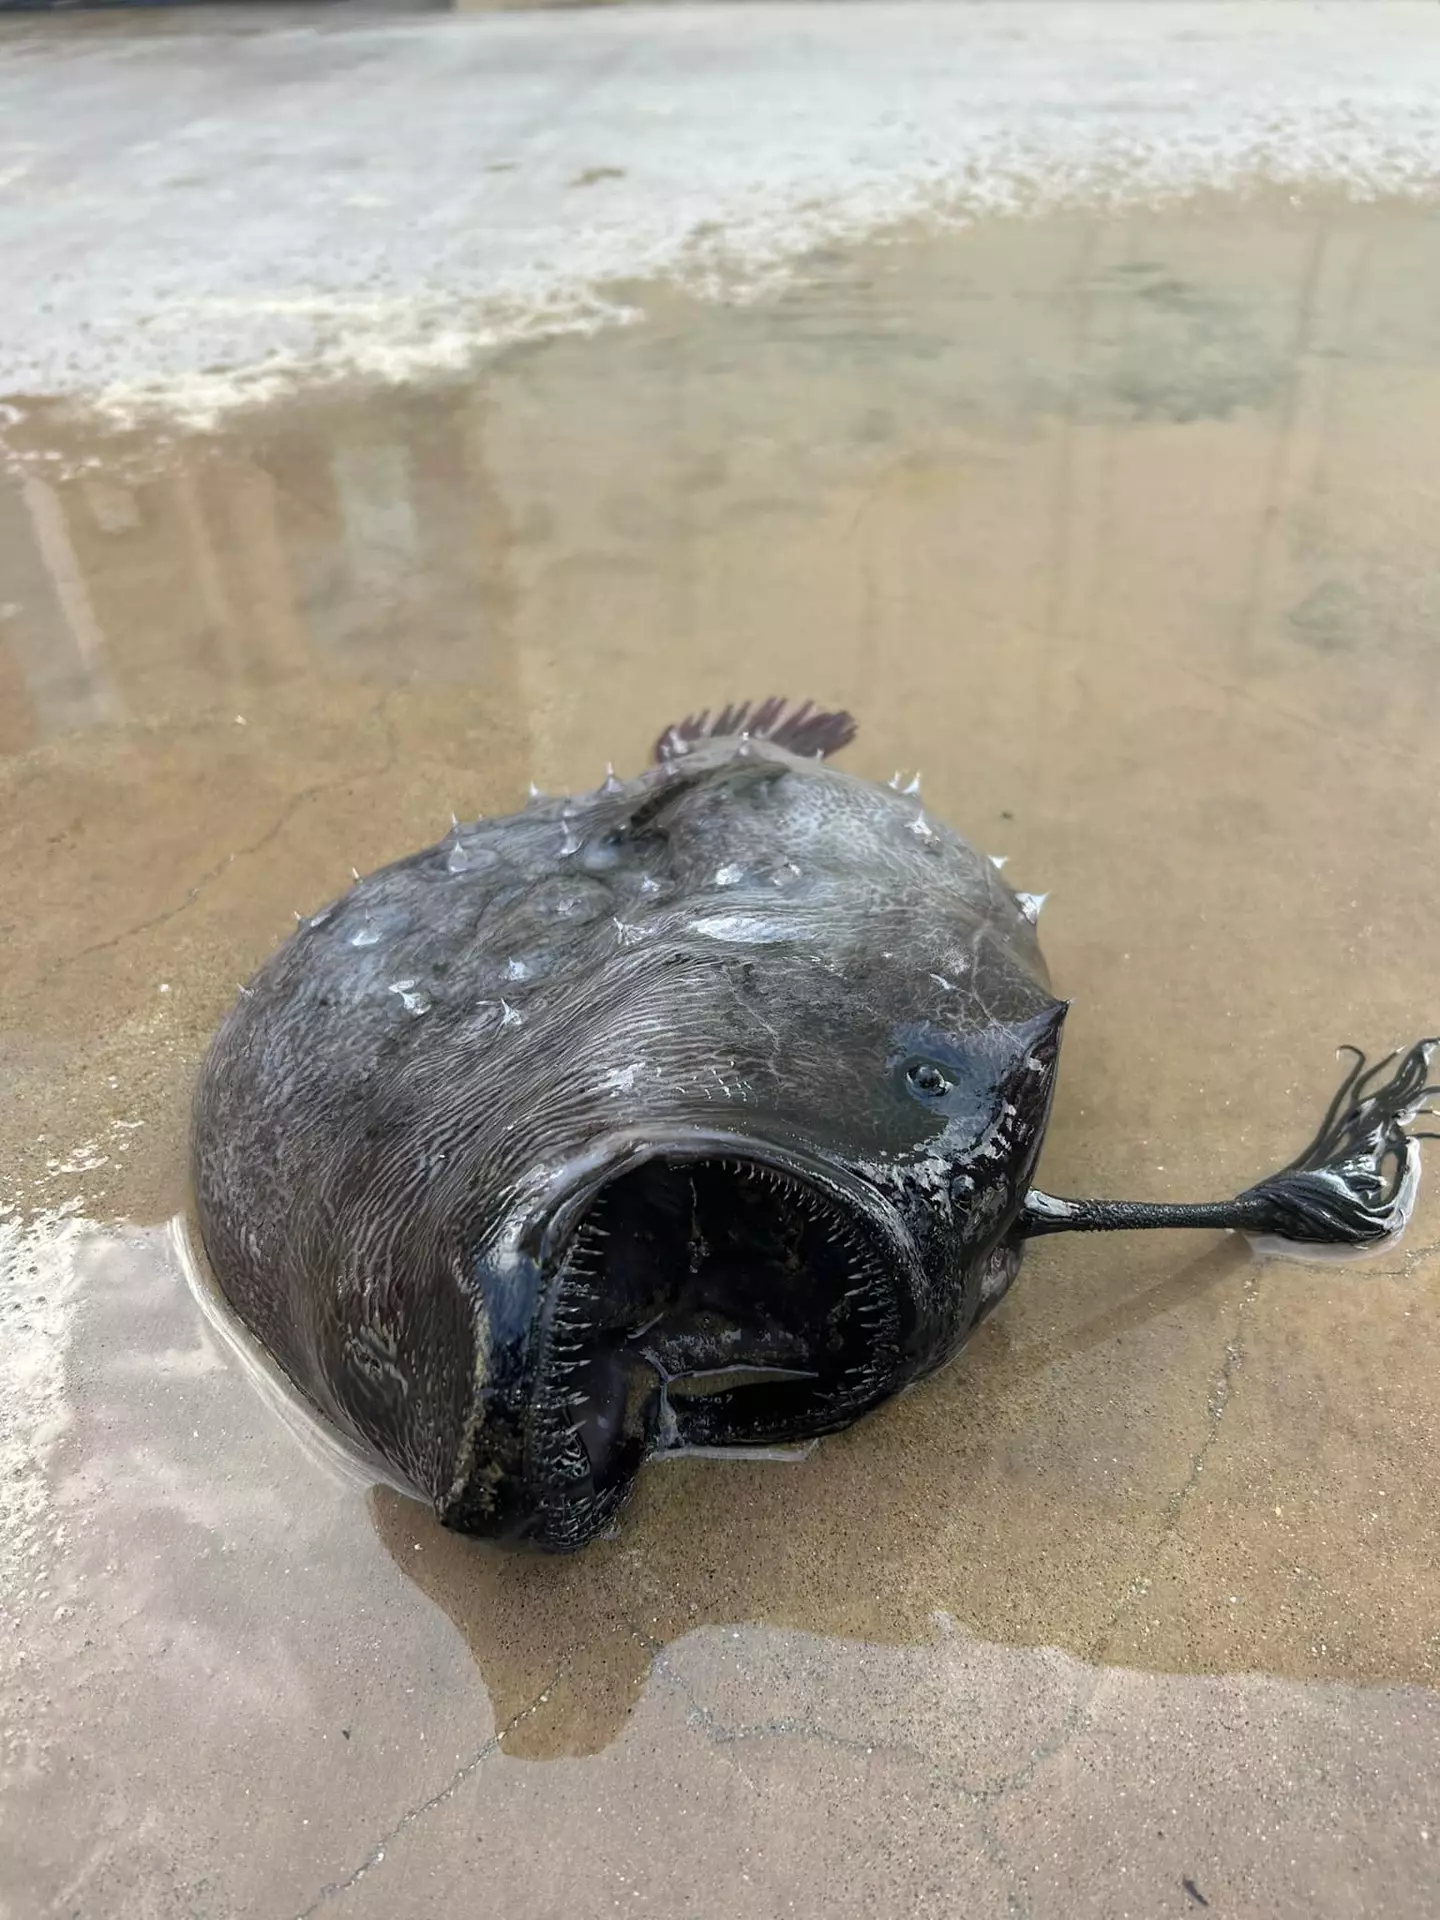 A Pacific footballfish washed up on a beach in California.